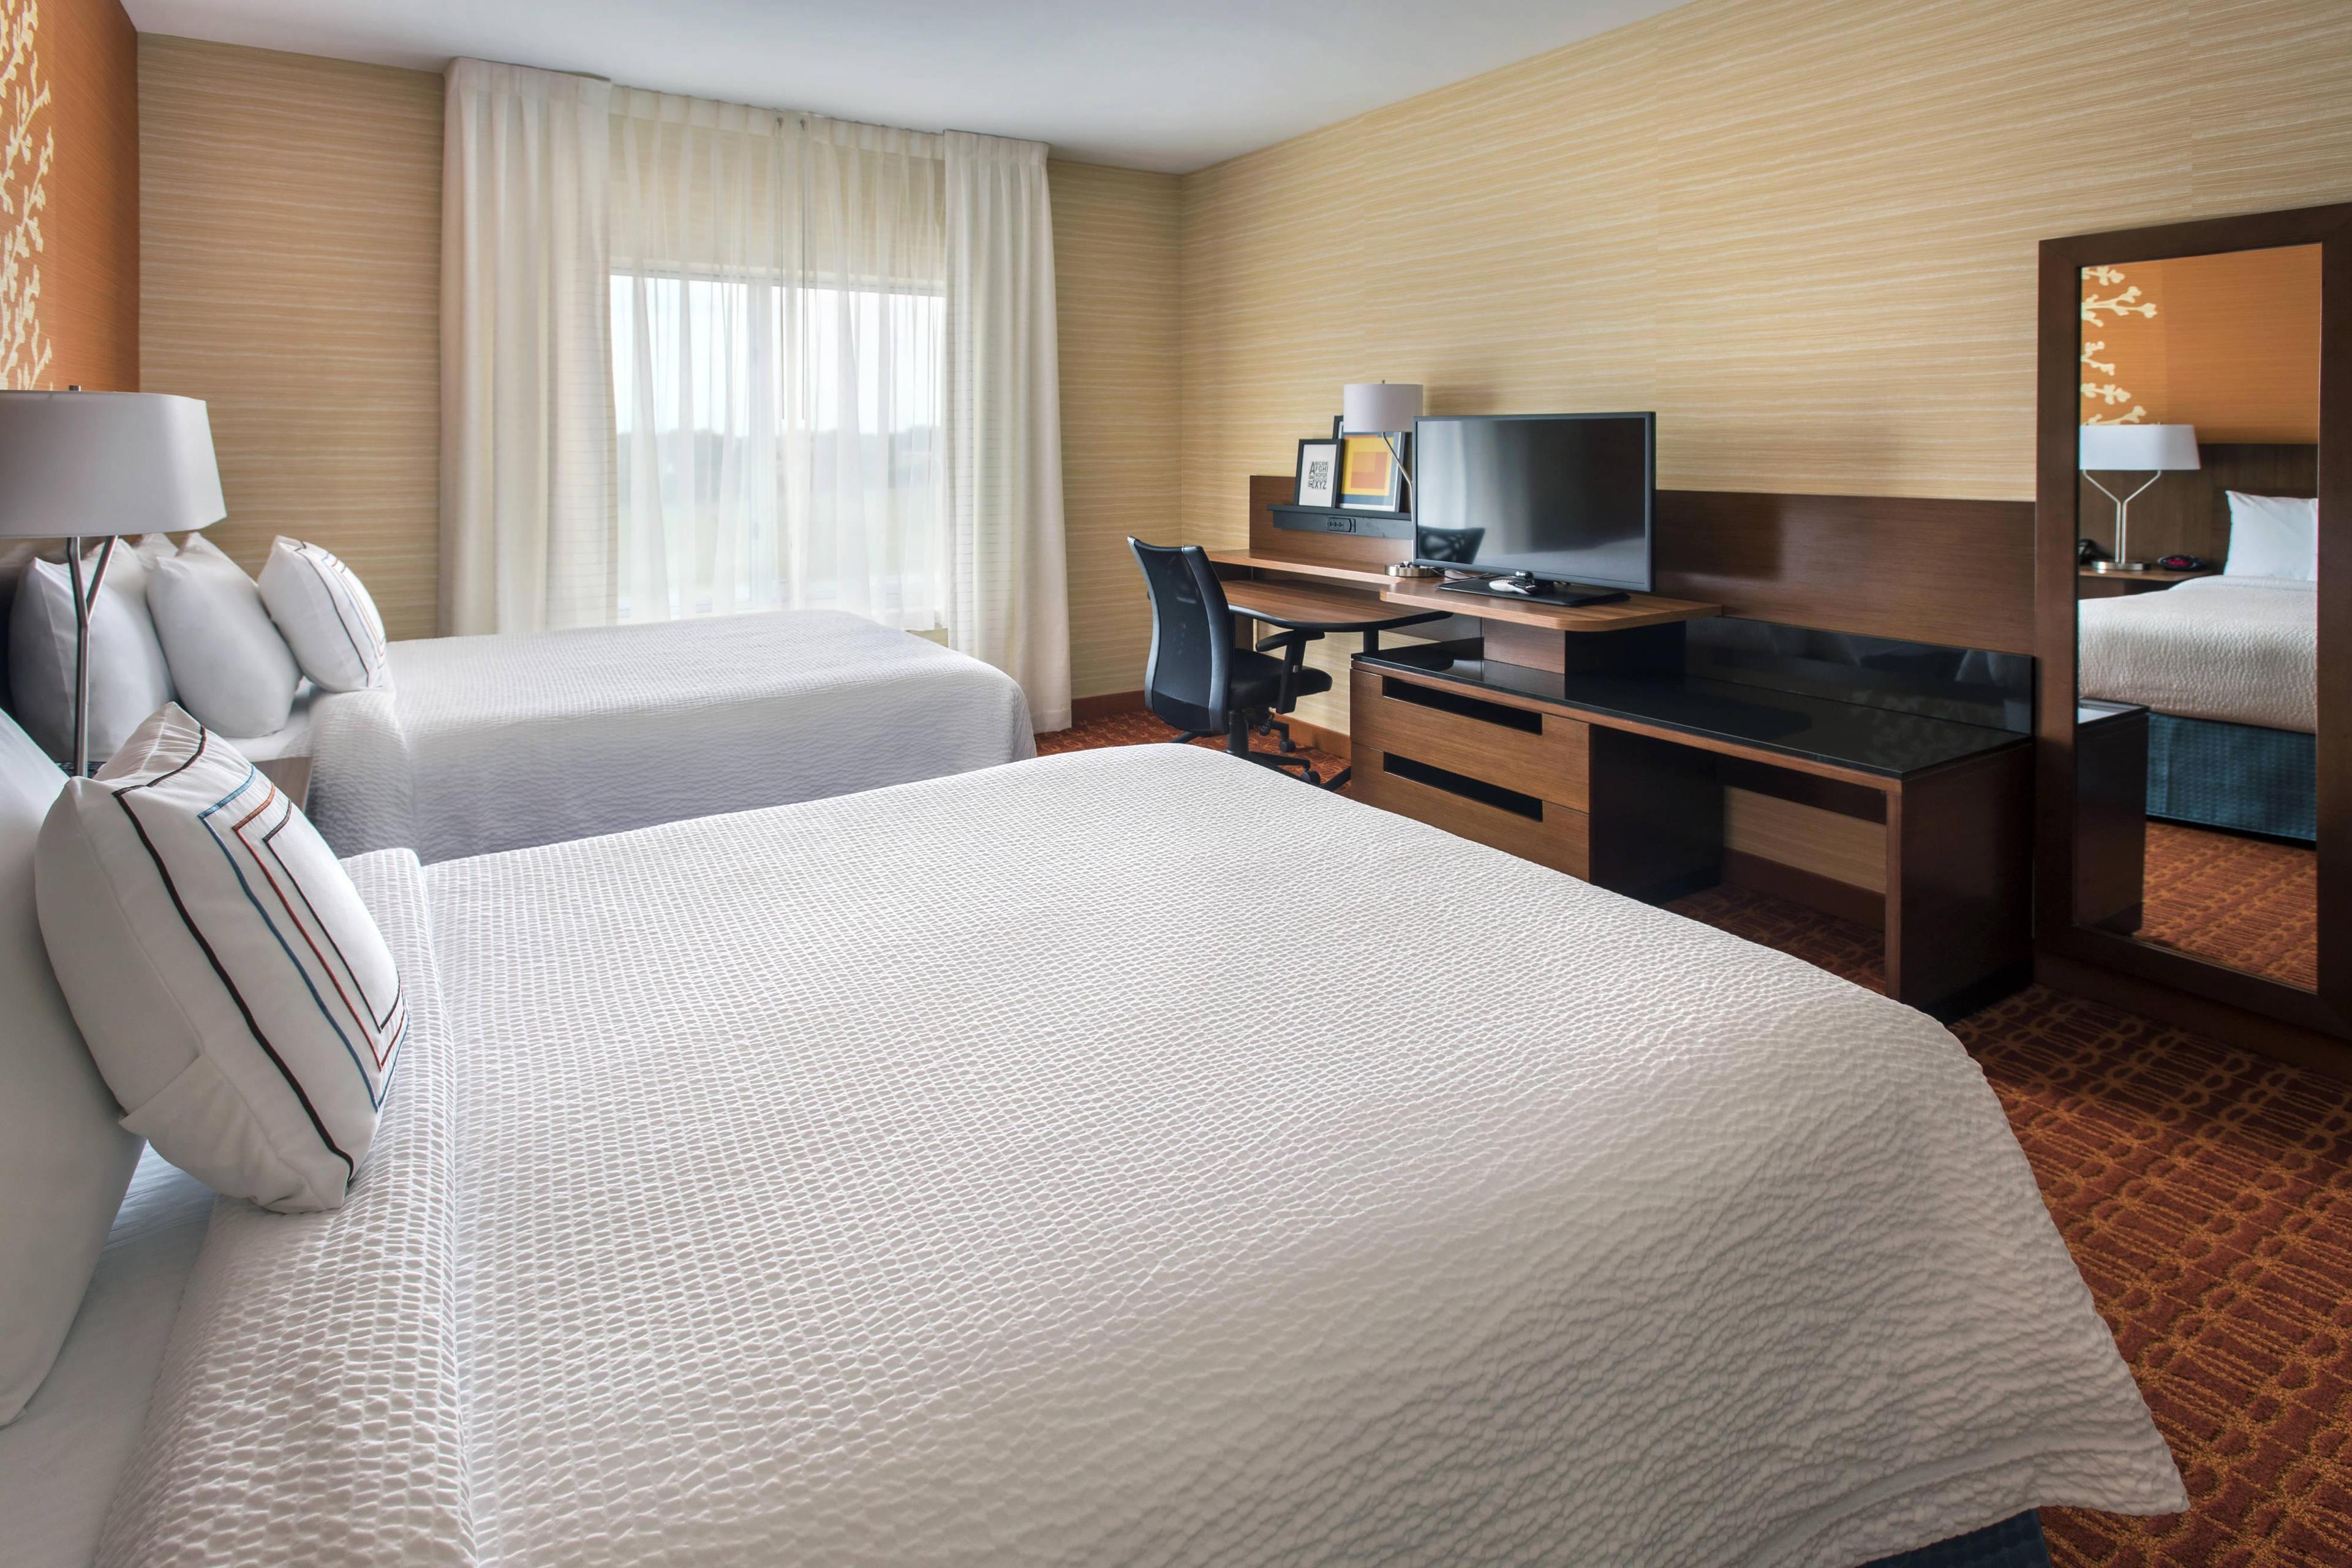 Our spacious queen/queen guest room is the ideal environment for a restful night for the entire family!